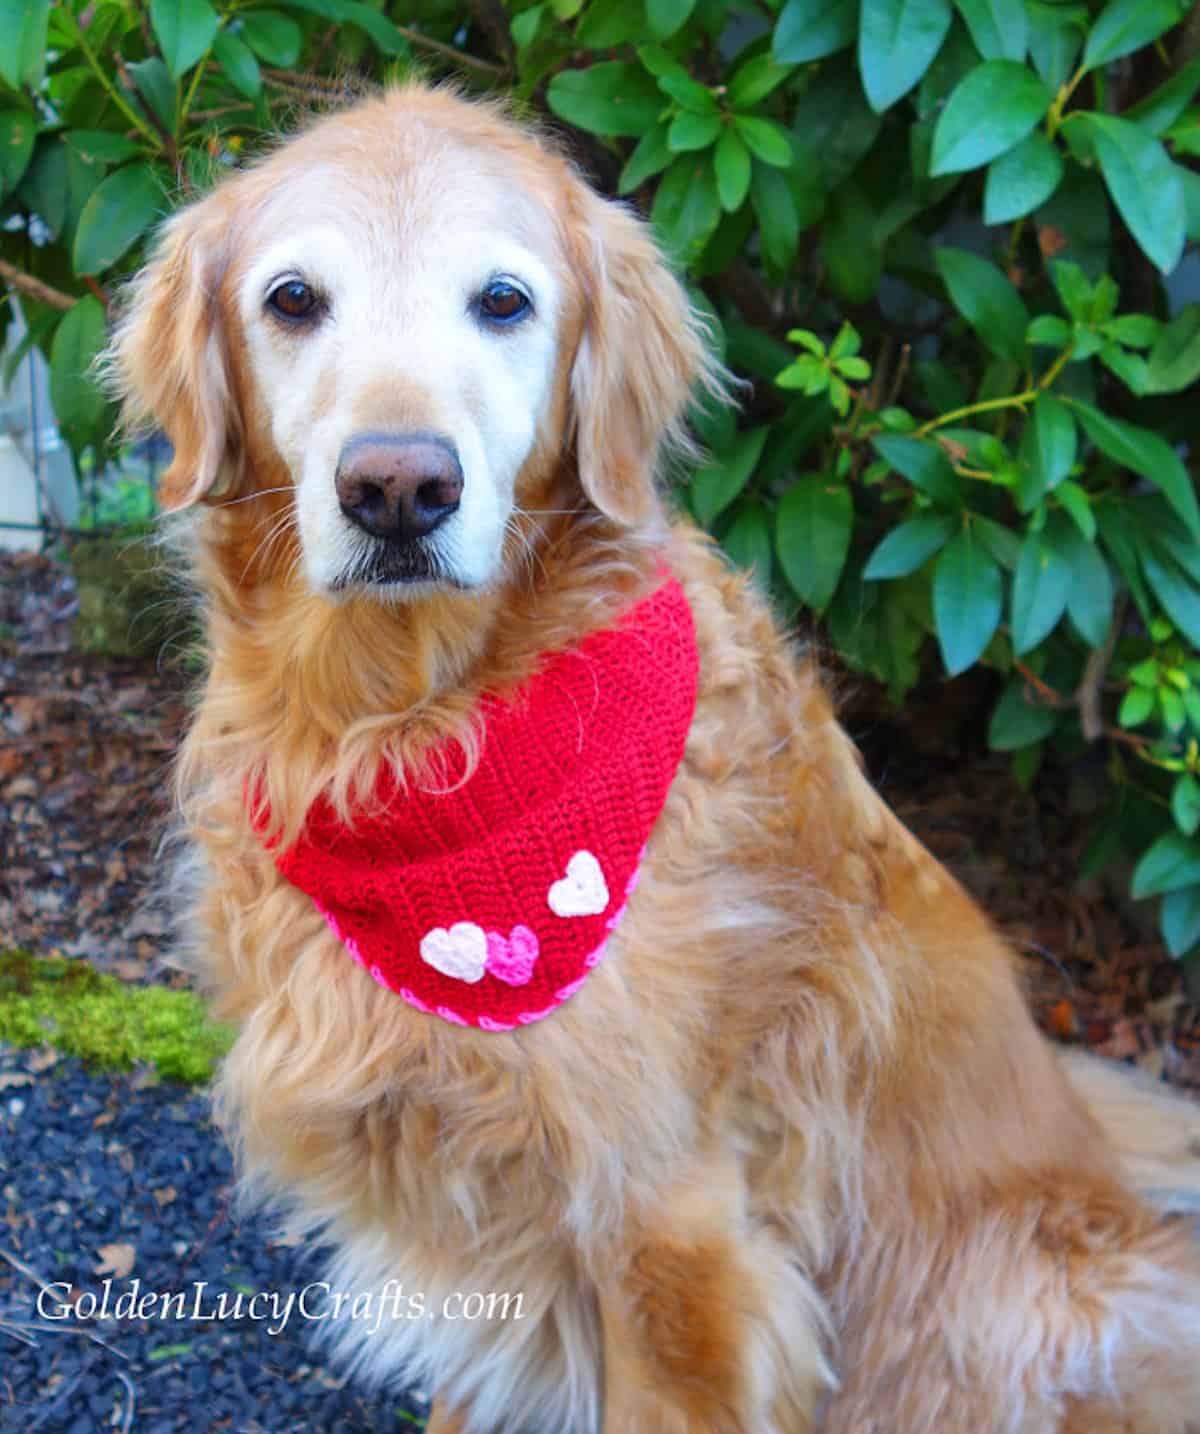 Dog dressed in red bandana embellished with three hearts.